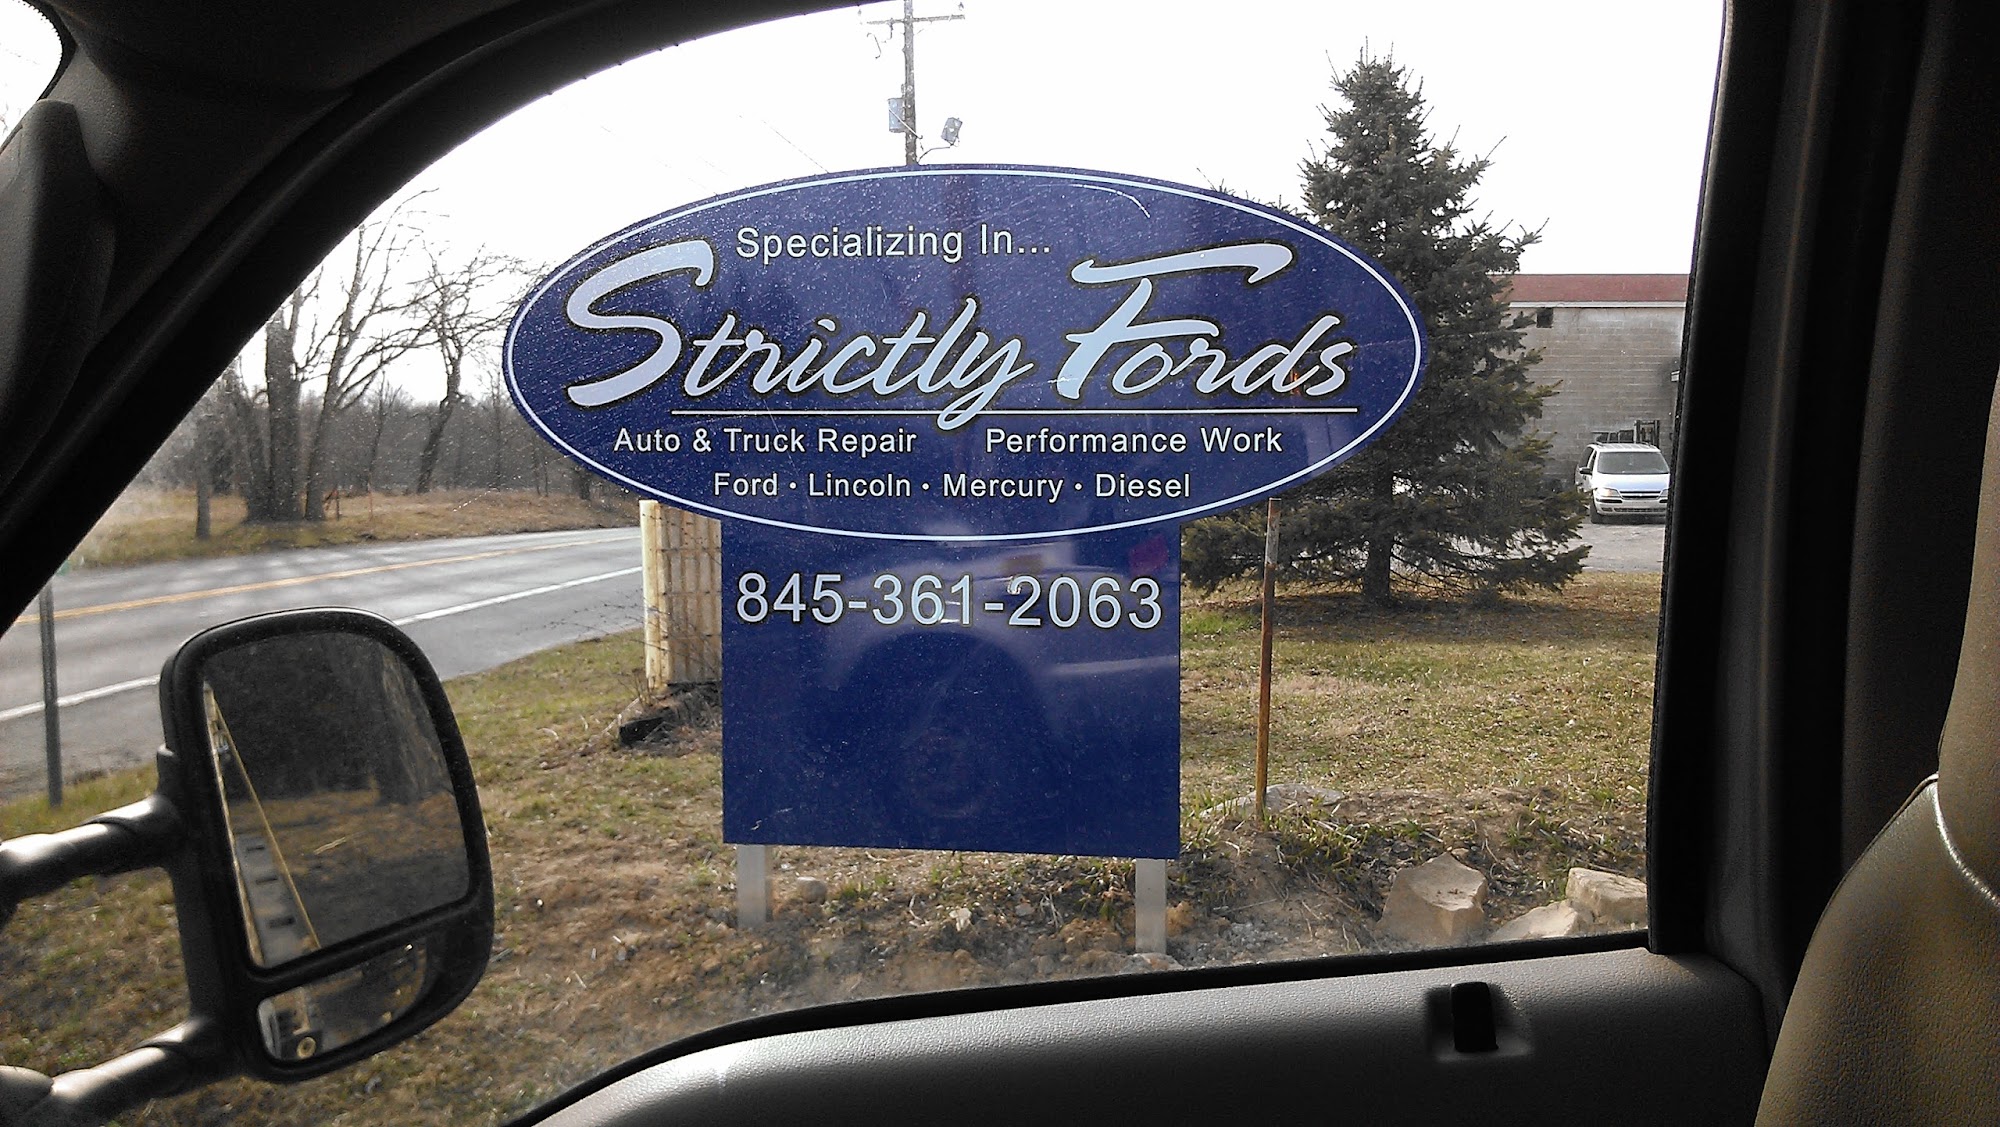 Strictly Fords